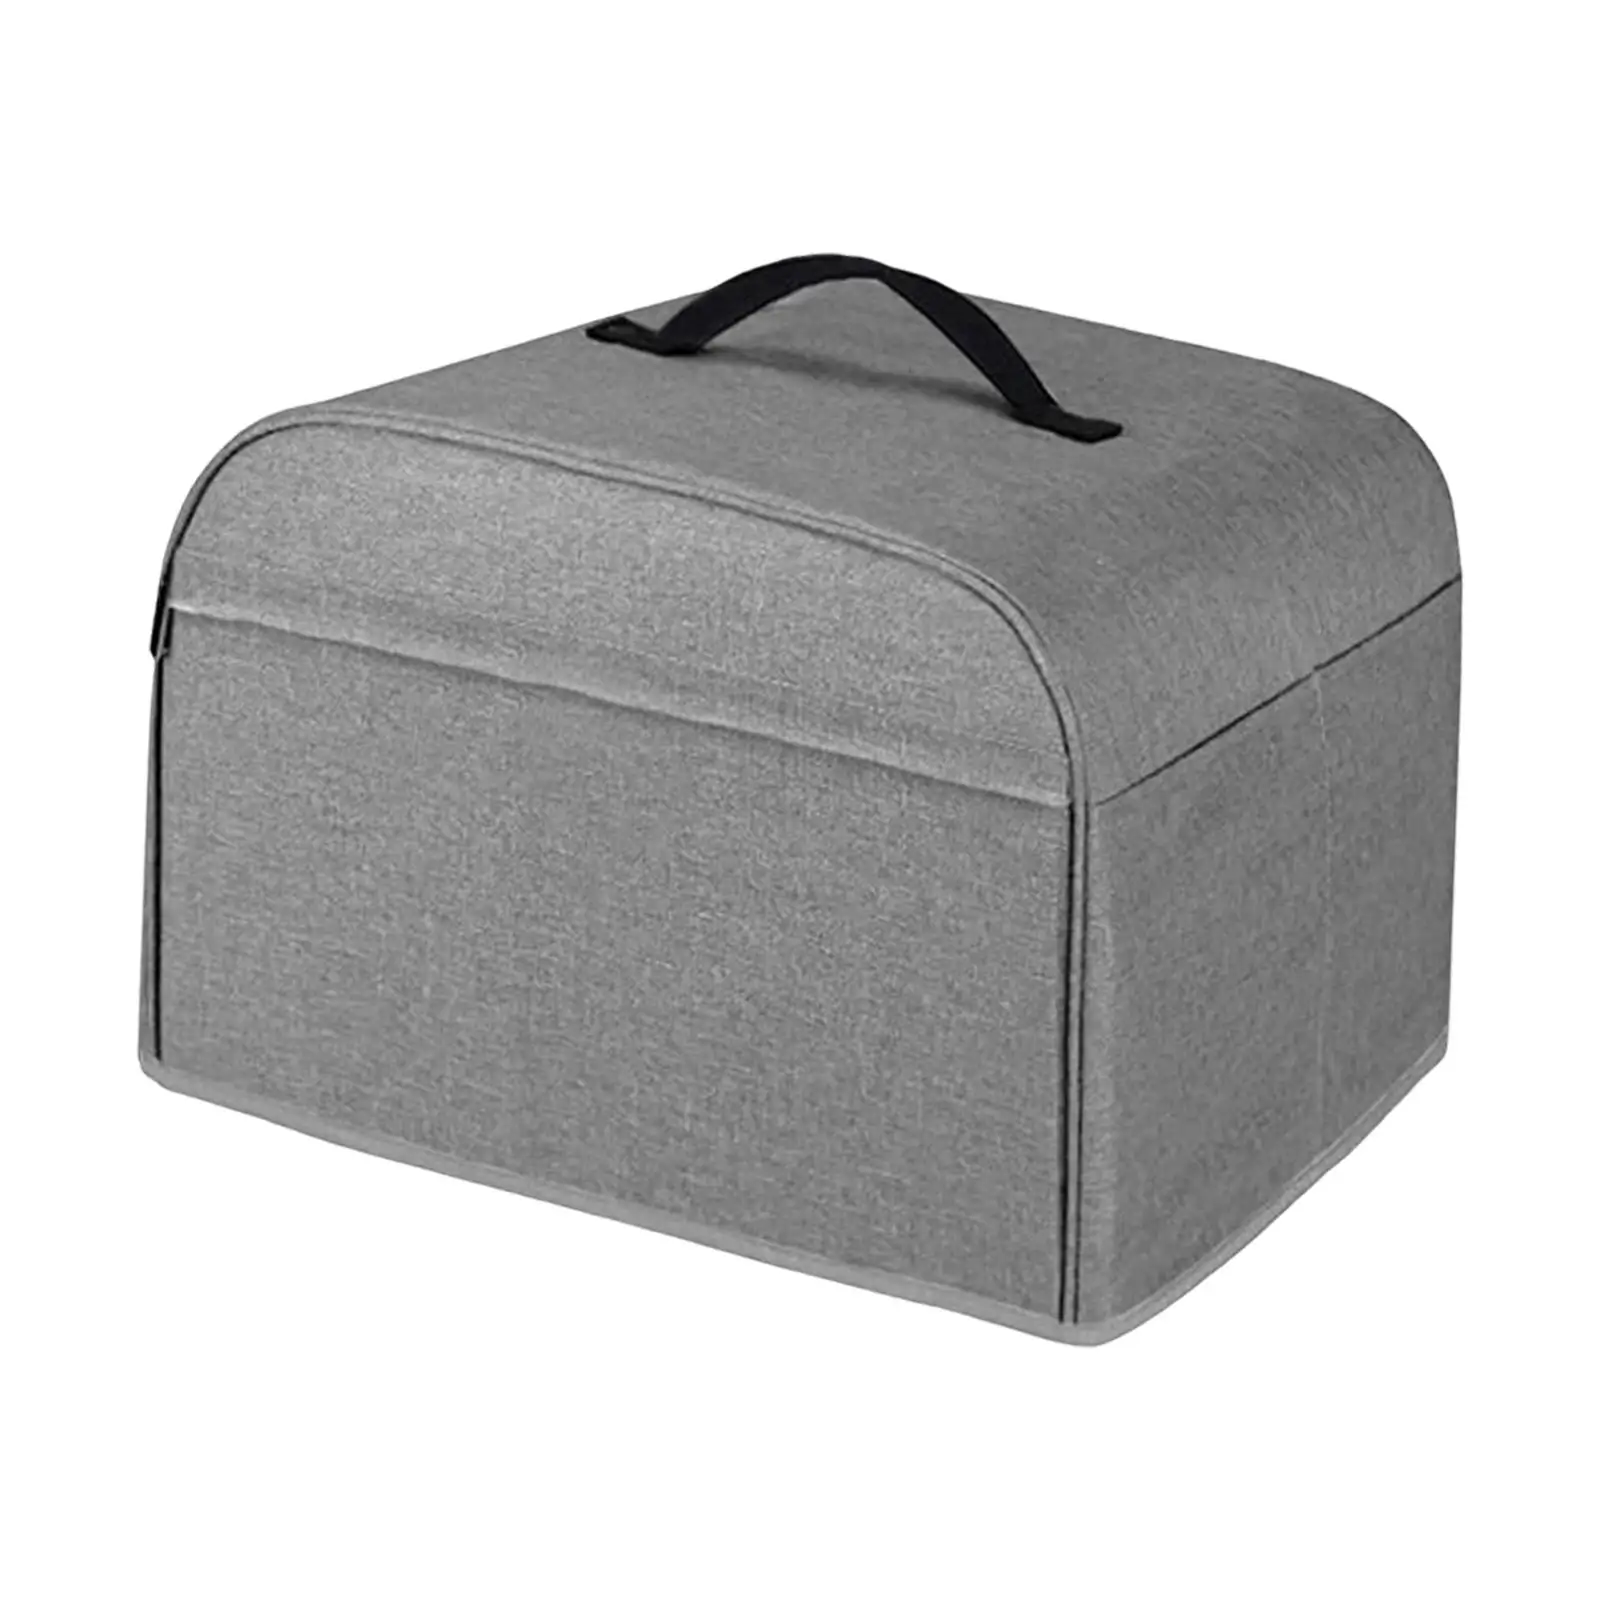 Picnic Portable Storage Bag bbq Cover bbq Accessories Bag BBQ Accessory Organizer bbq Storage bag for outdoor